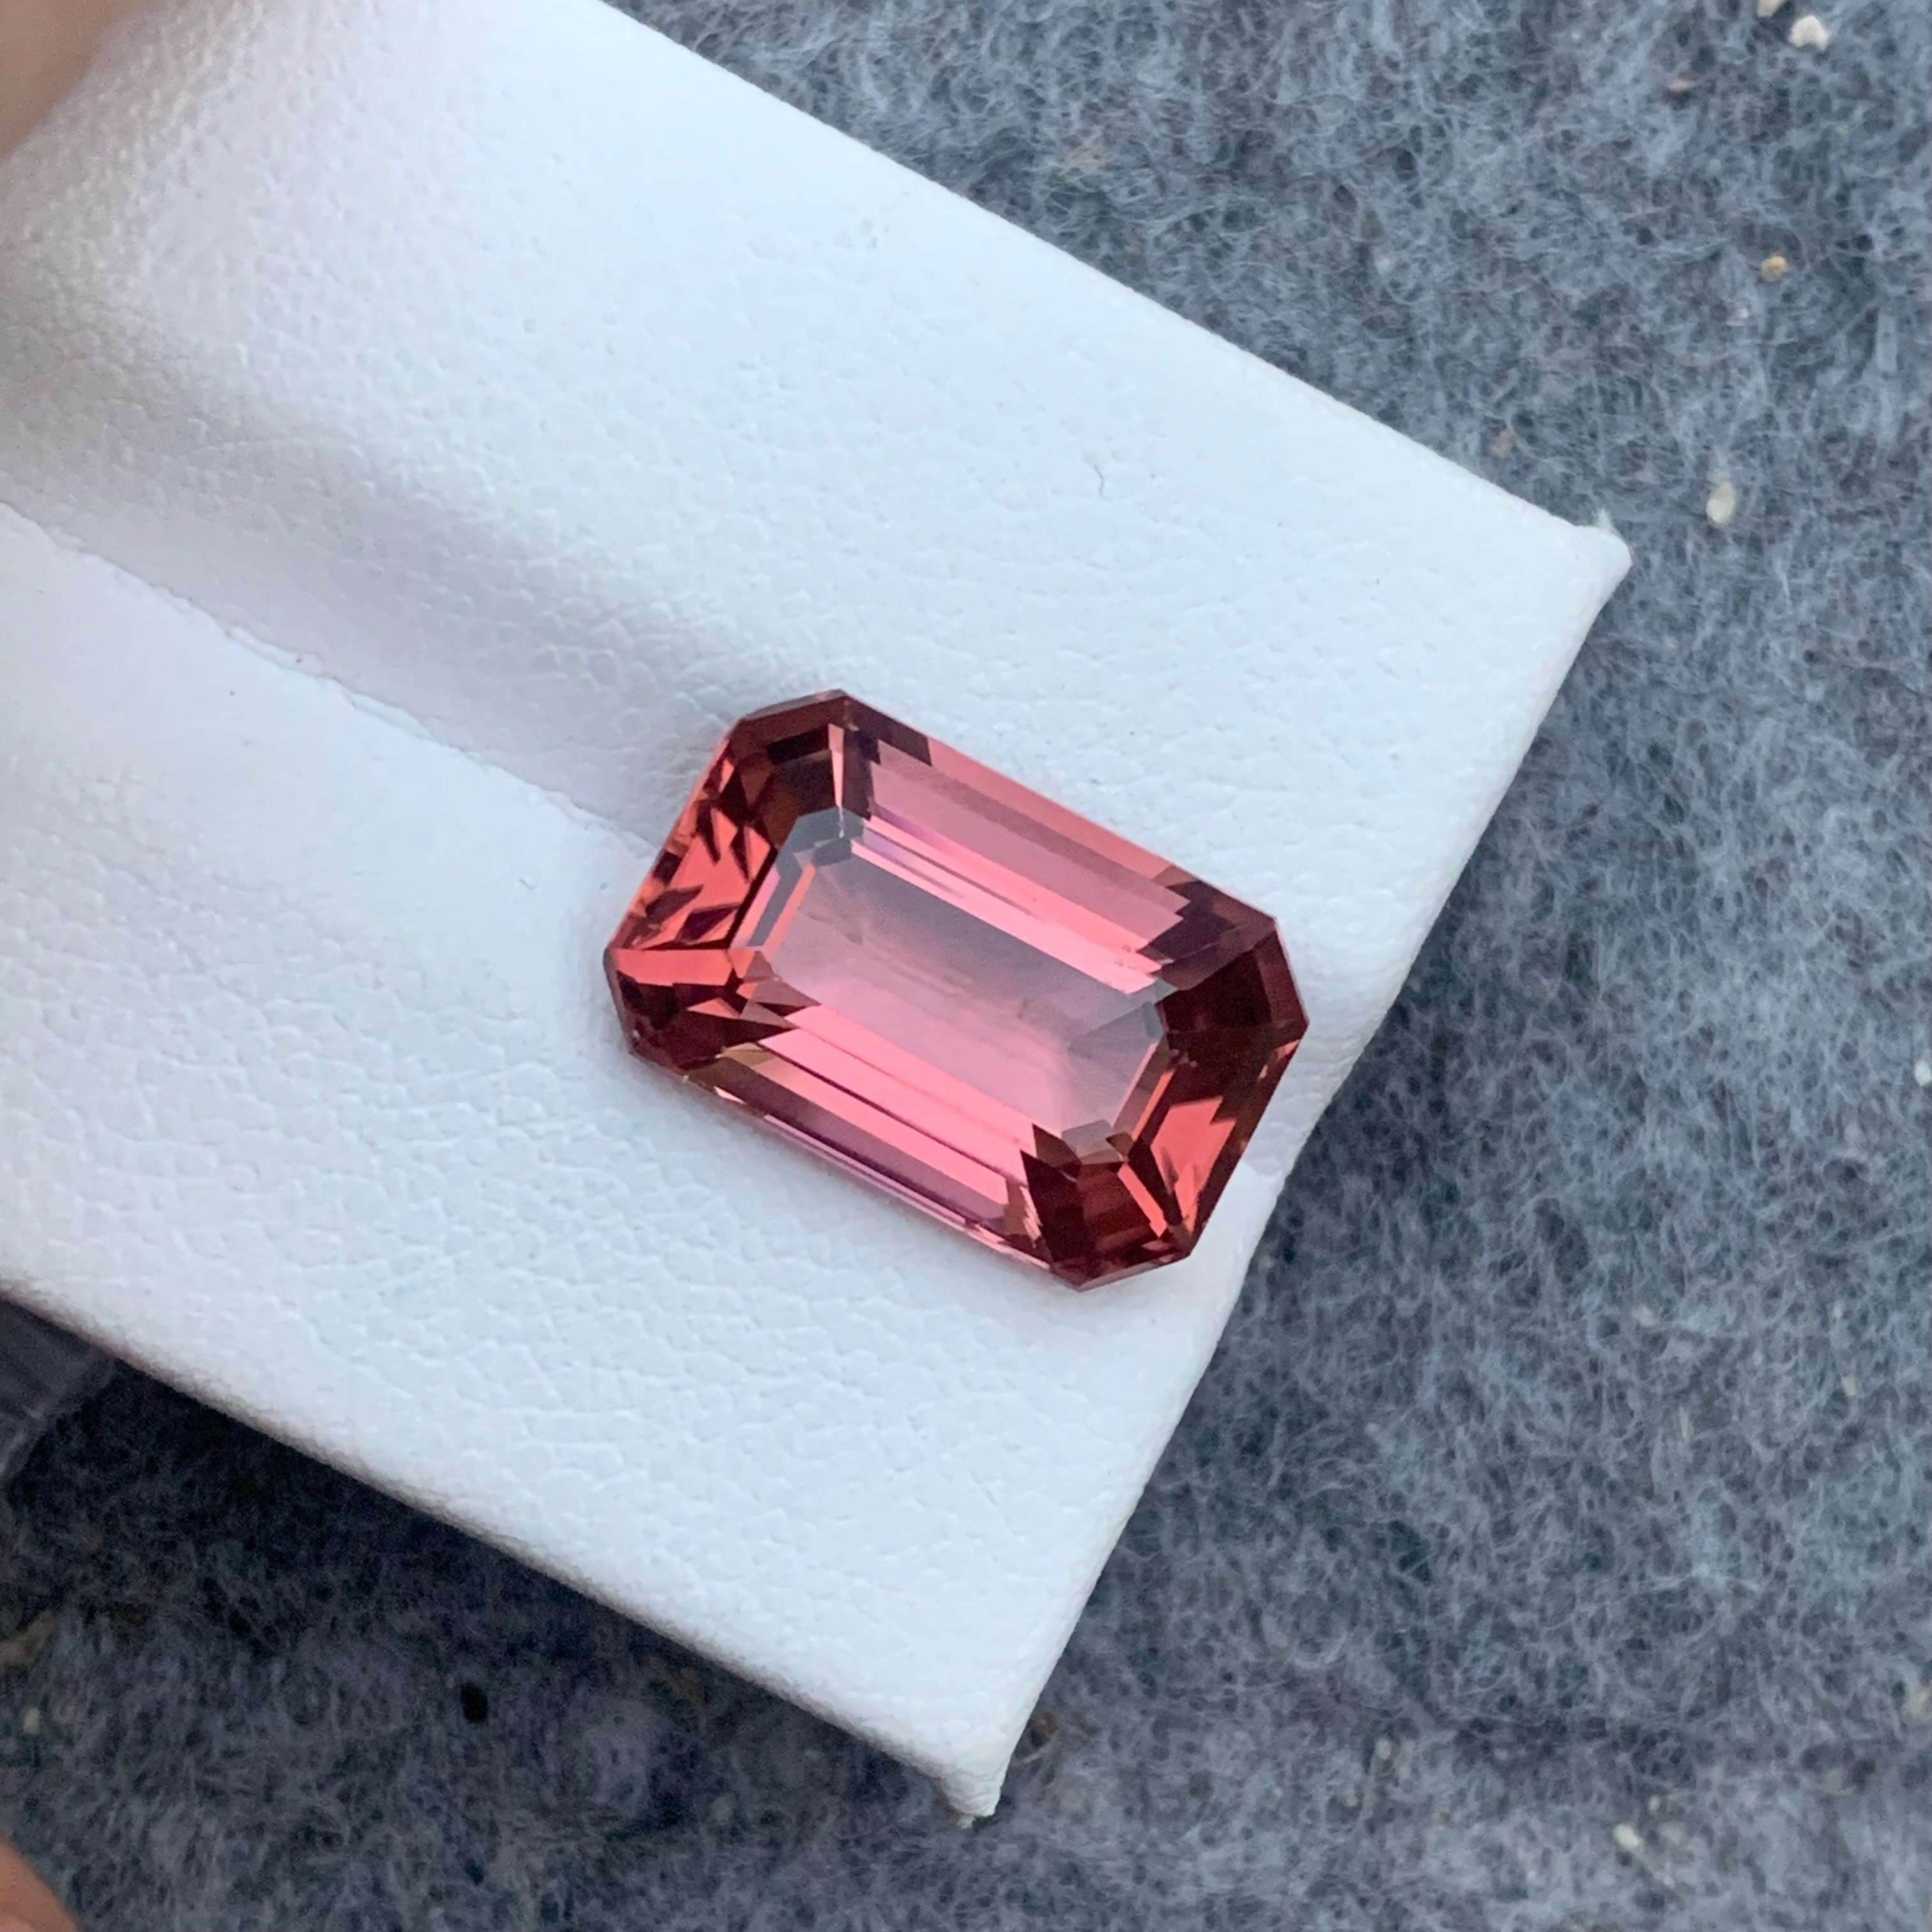 Women's or Men's 9.0 Carat AAA Quality Loose Soft Pink Tourmaline Emerald Cut From Afghanistan